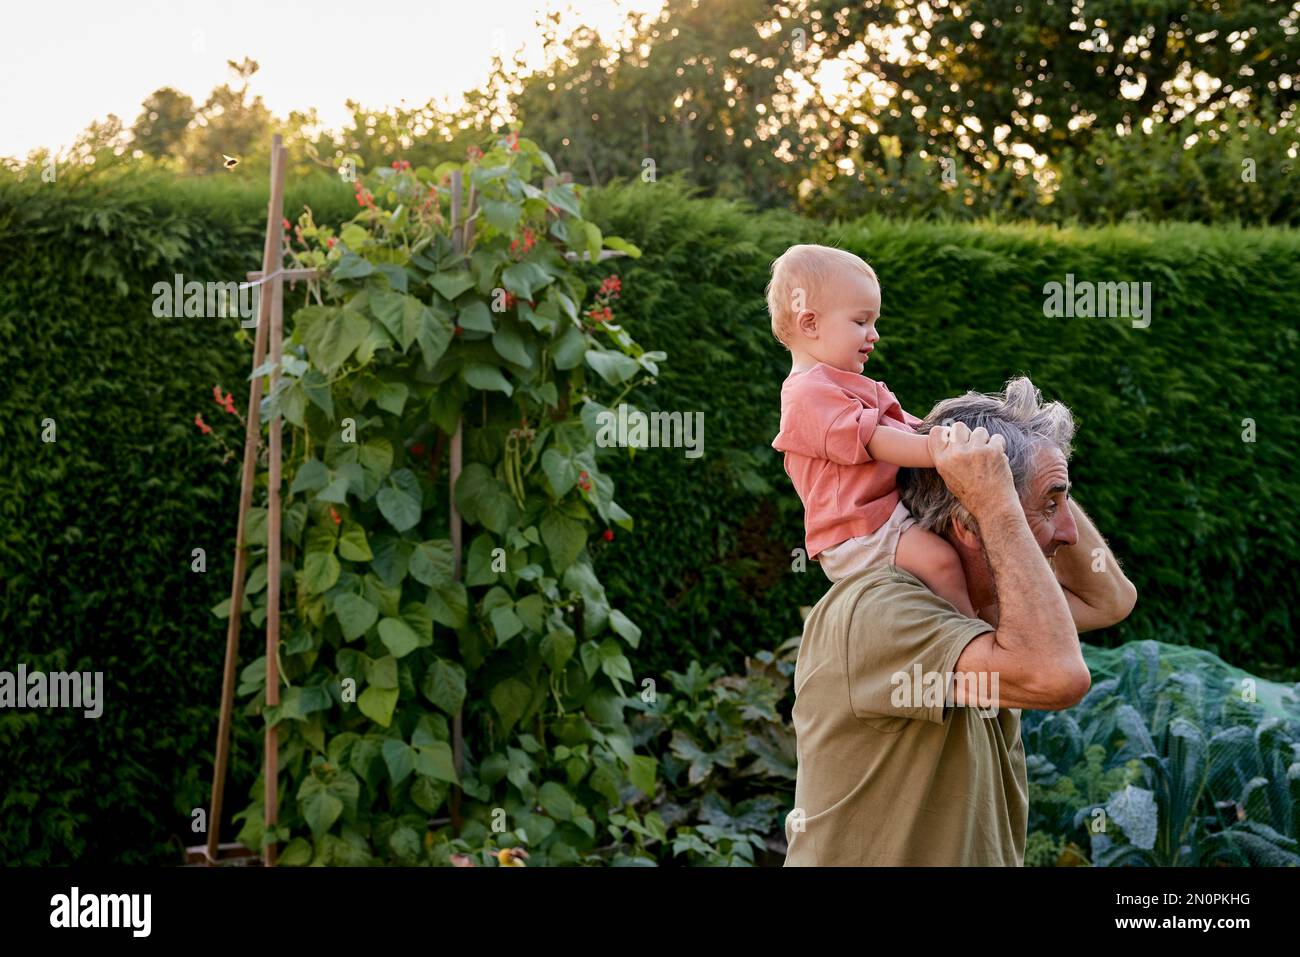 Grandfather carrying toddler on shoulders walking in garden Stock Photo